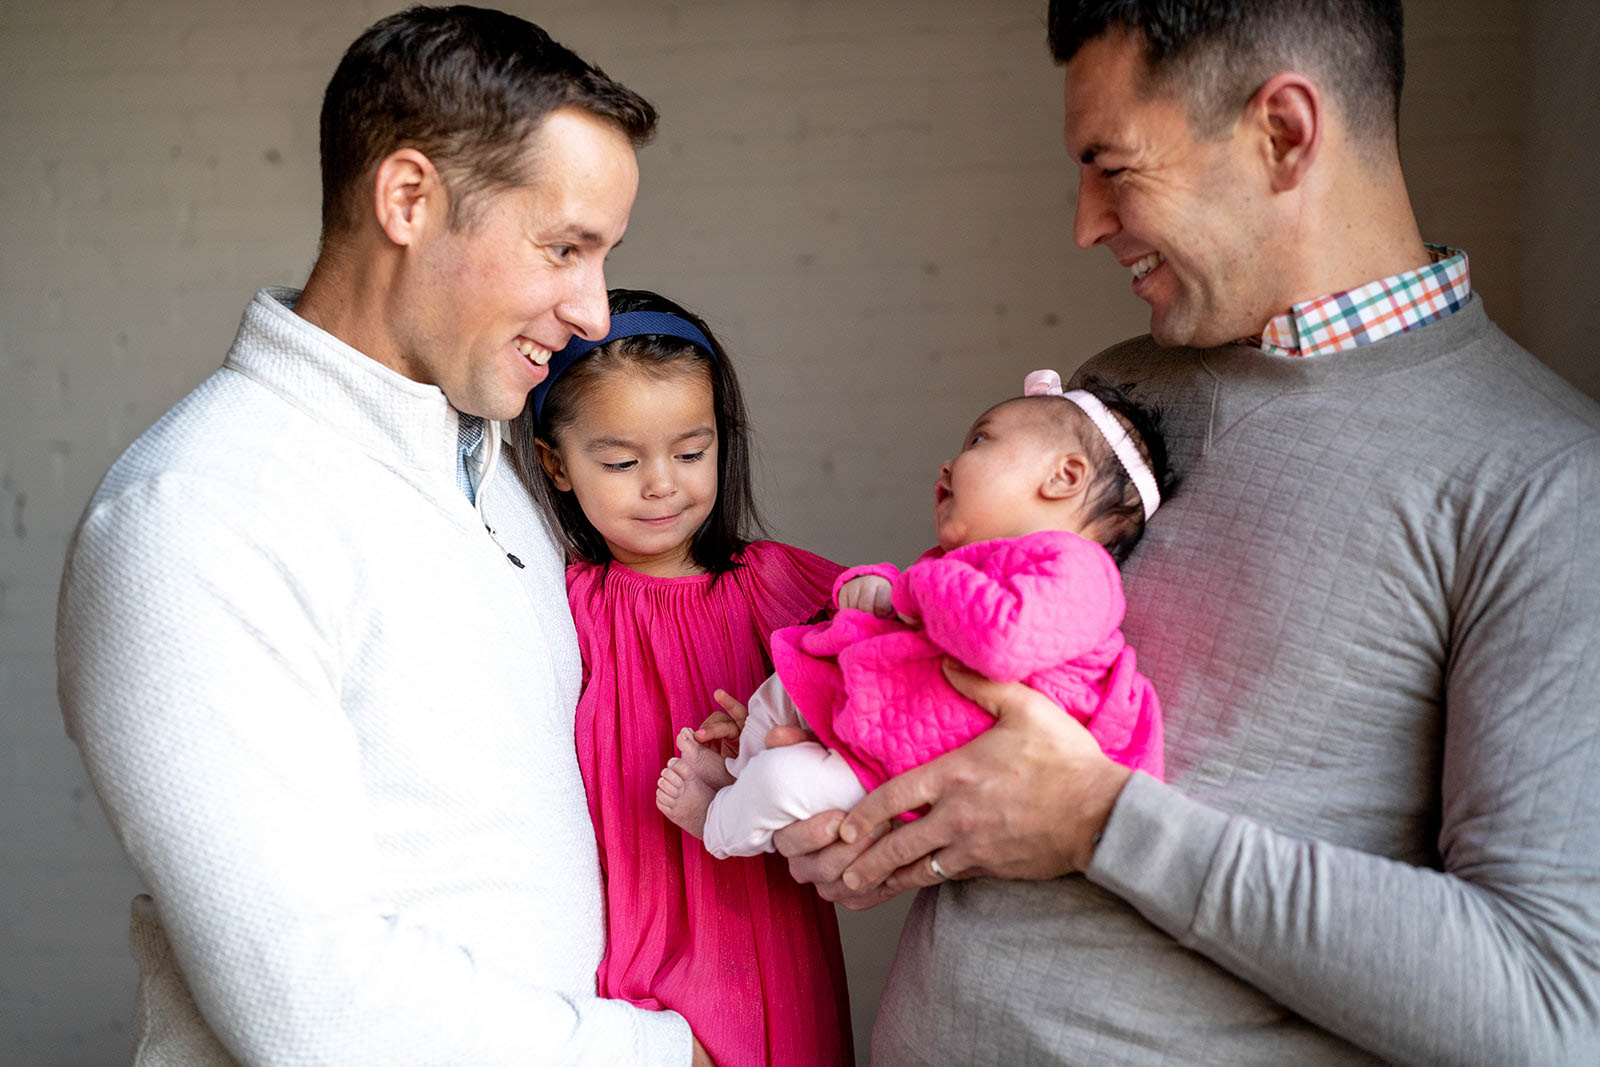 Two dads in neutral outfits holding their yound daughters in hot pink dresses, and smiling